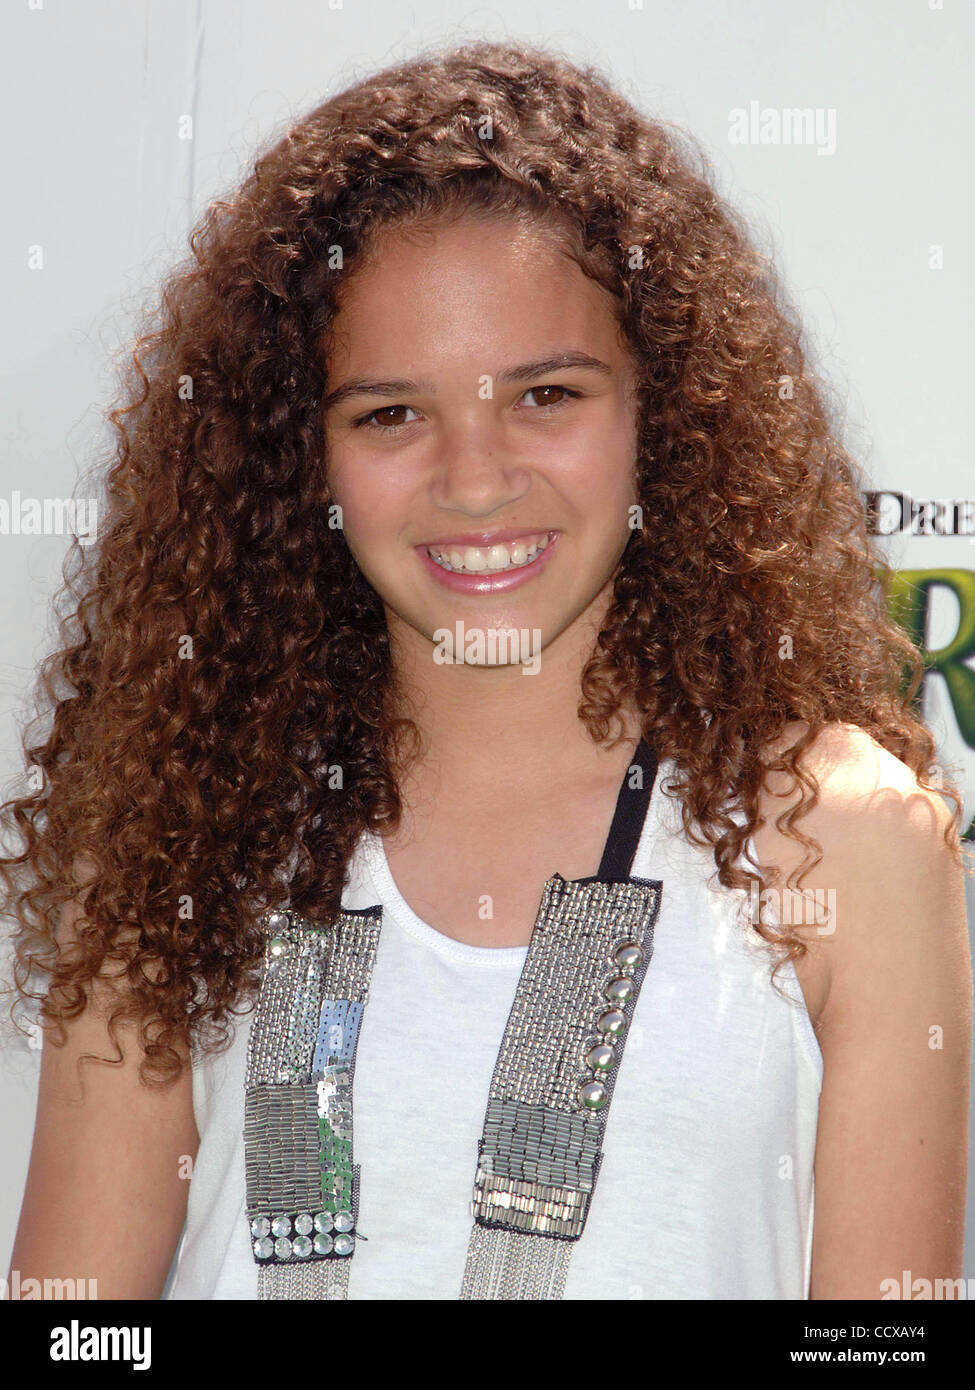 May 16, 2010 - Los Angeles, California, U.S. - MADISON PETTIS Attending The Los Angeles Premiere Of ''Shrek Forever After'' Held At Universal Studios In Universal City, CA. 05-16-10. 2010.K64840LONG(Credit Image: Â© D. Long/Globe Photos/ZUMApress.com) Stock Photo